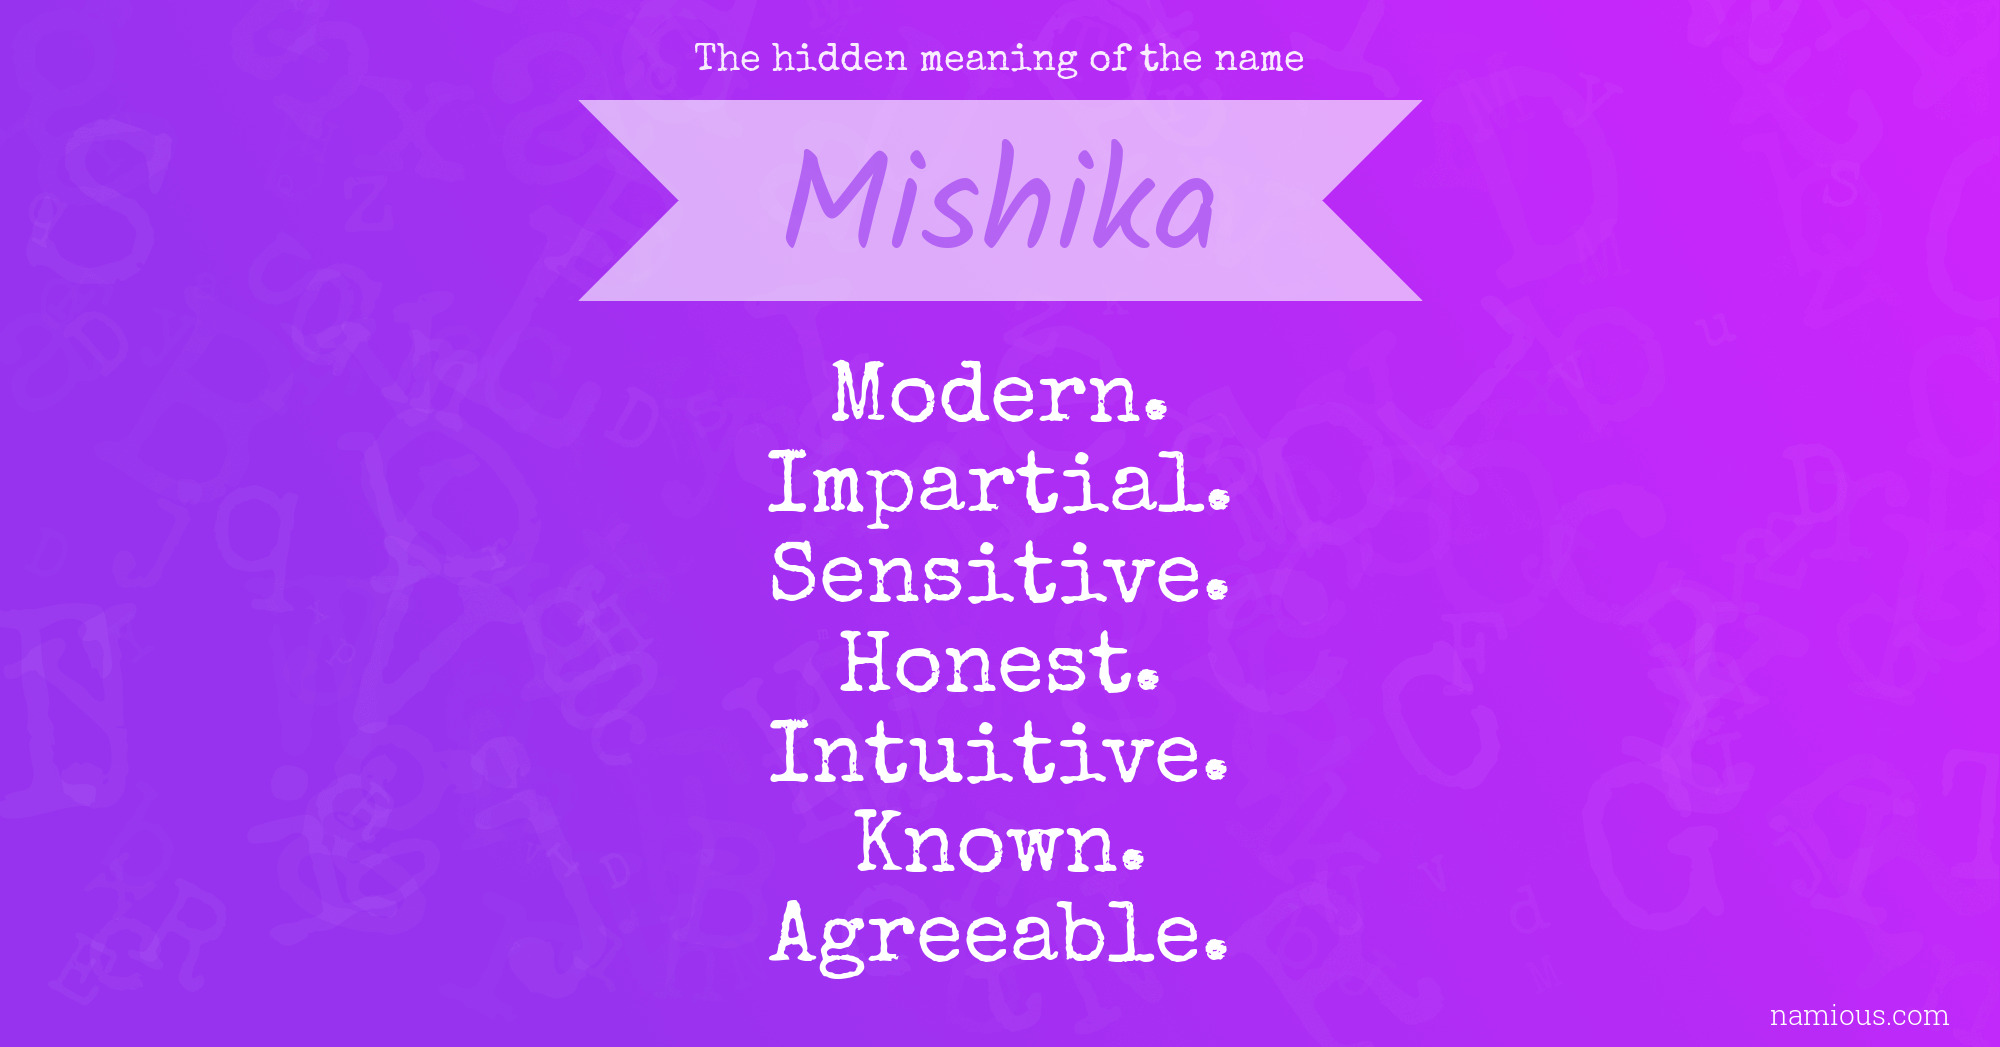 The hidden meaning of the name Mishika